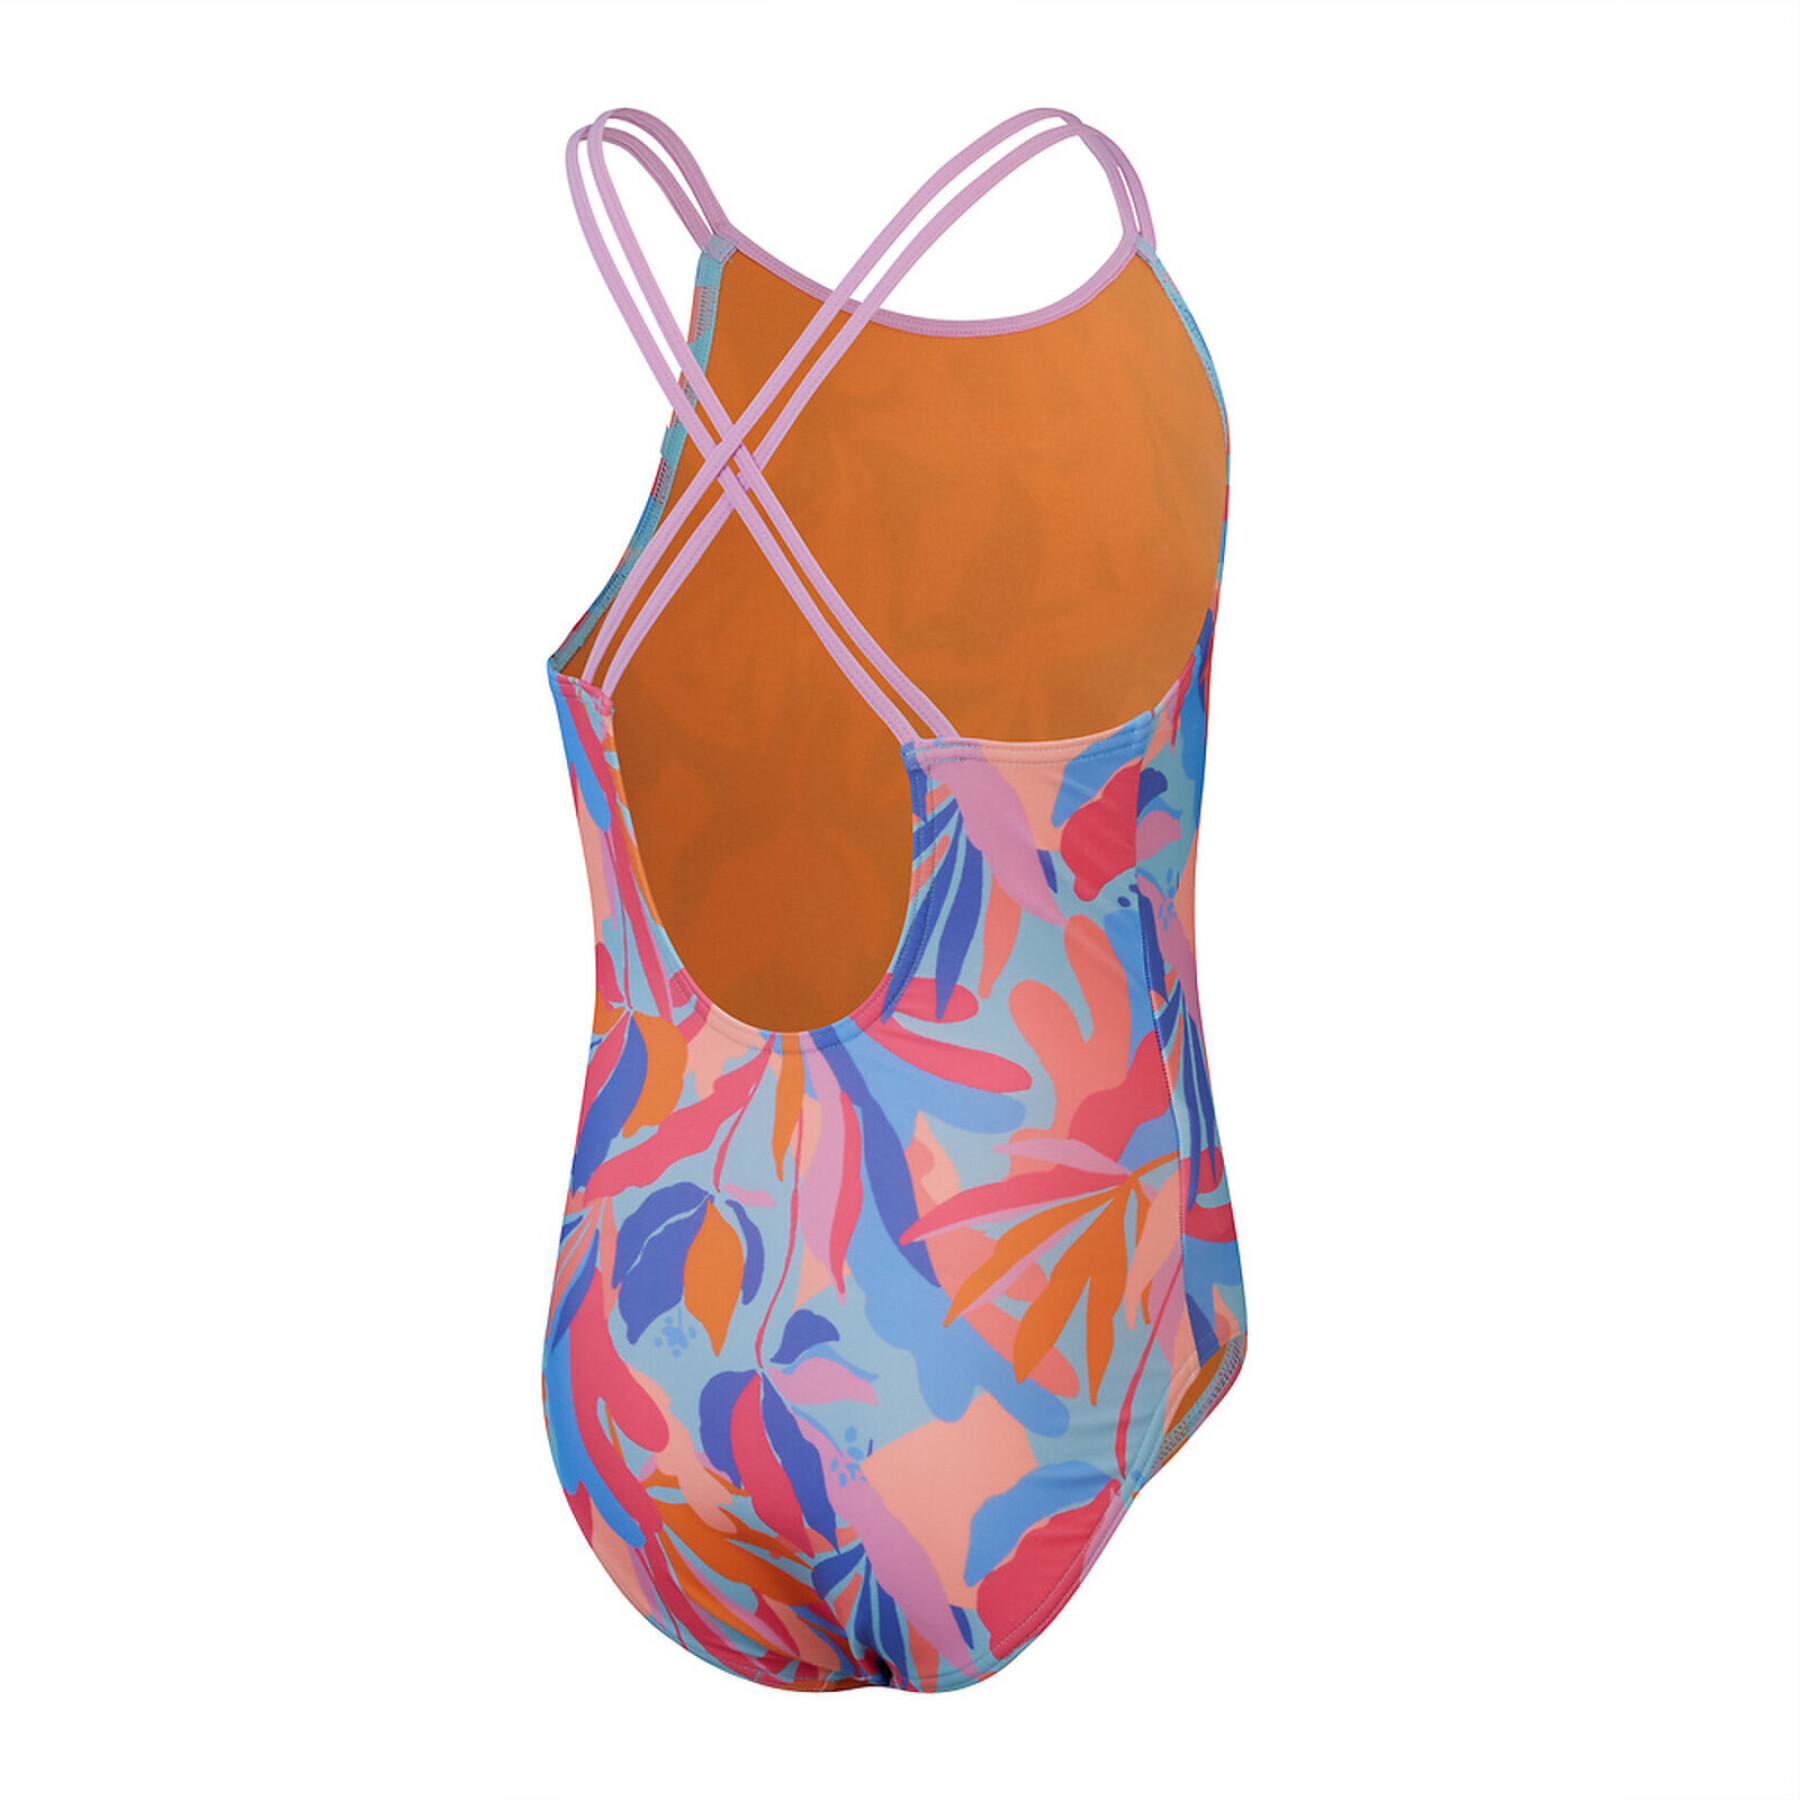 One-piece swimsuit for girls Speedo Printed Twinstrap